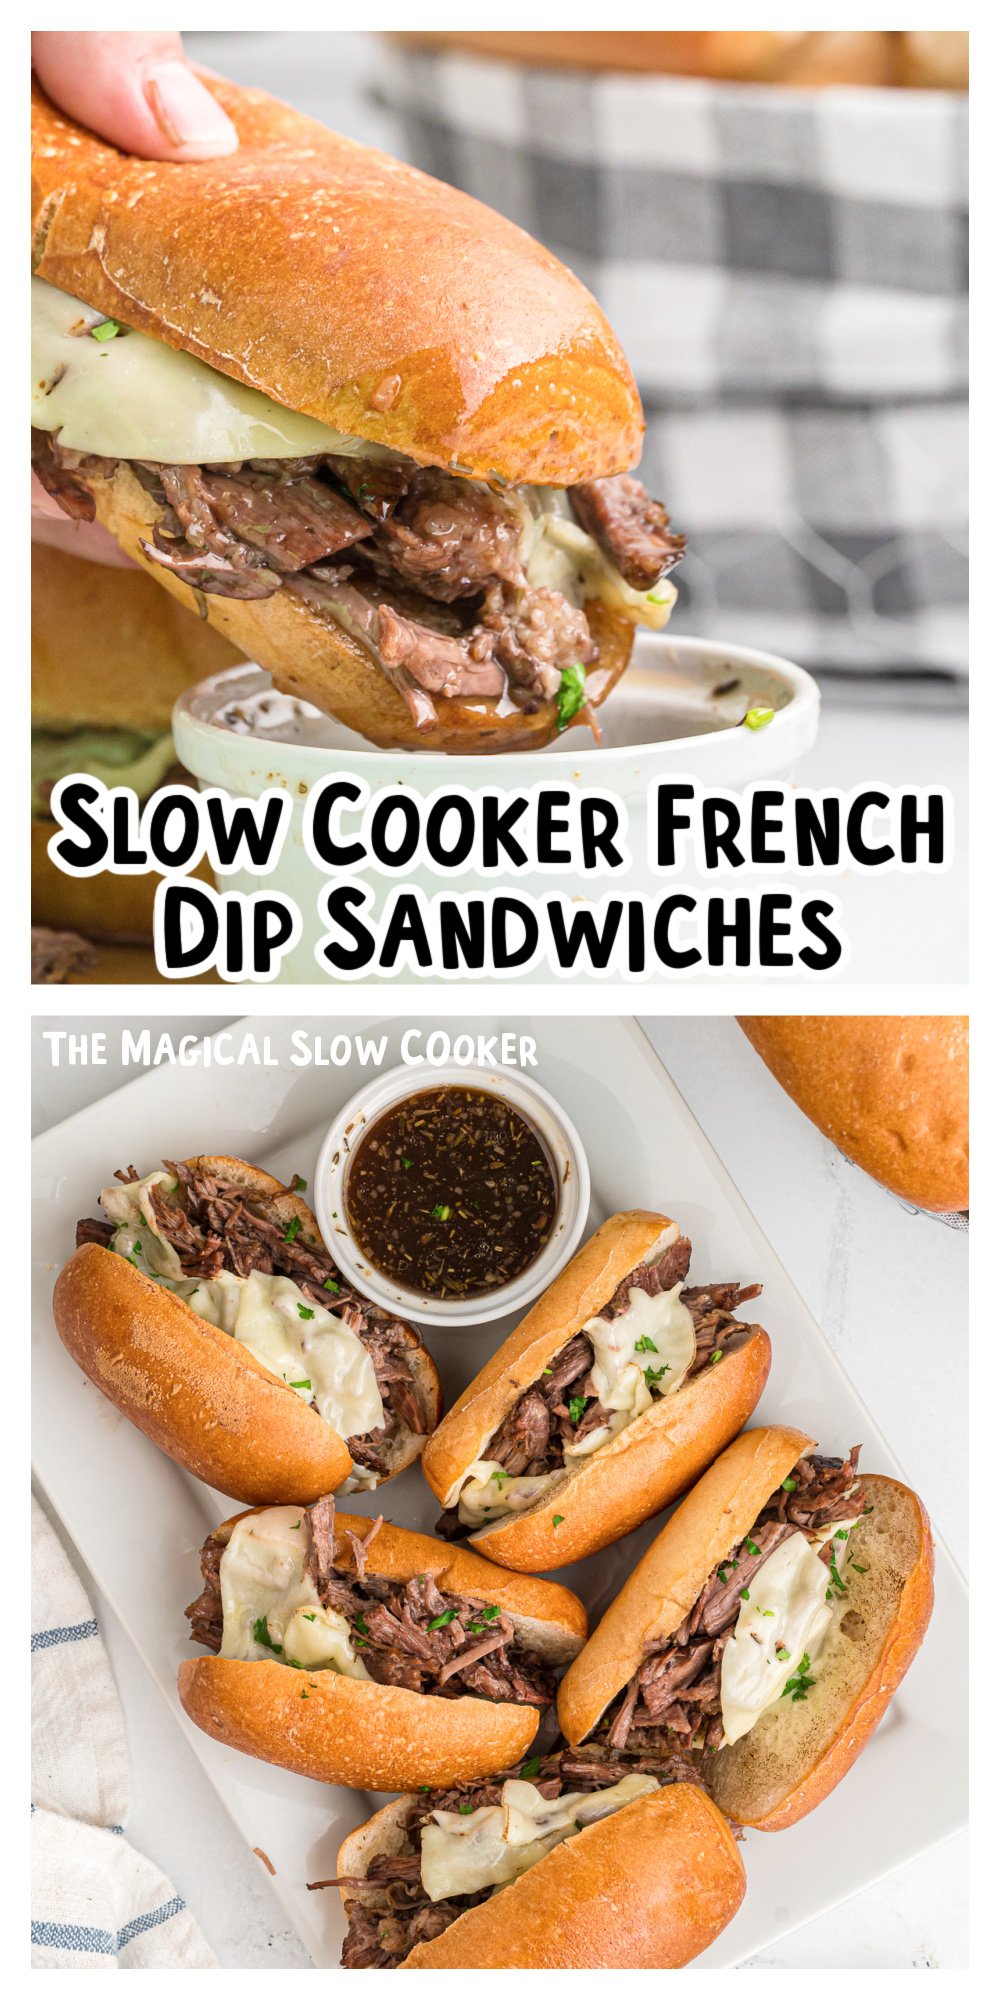 Slow Cooker French Dip Sandwiches - The Magical Slow Cooker